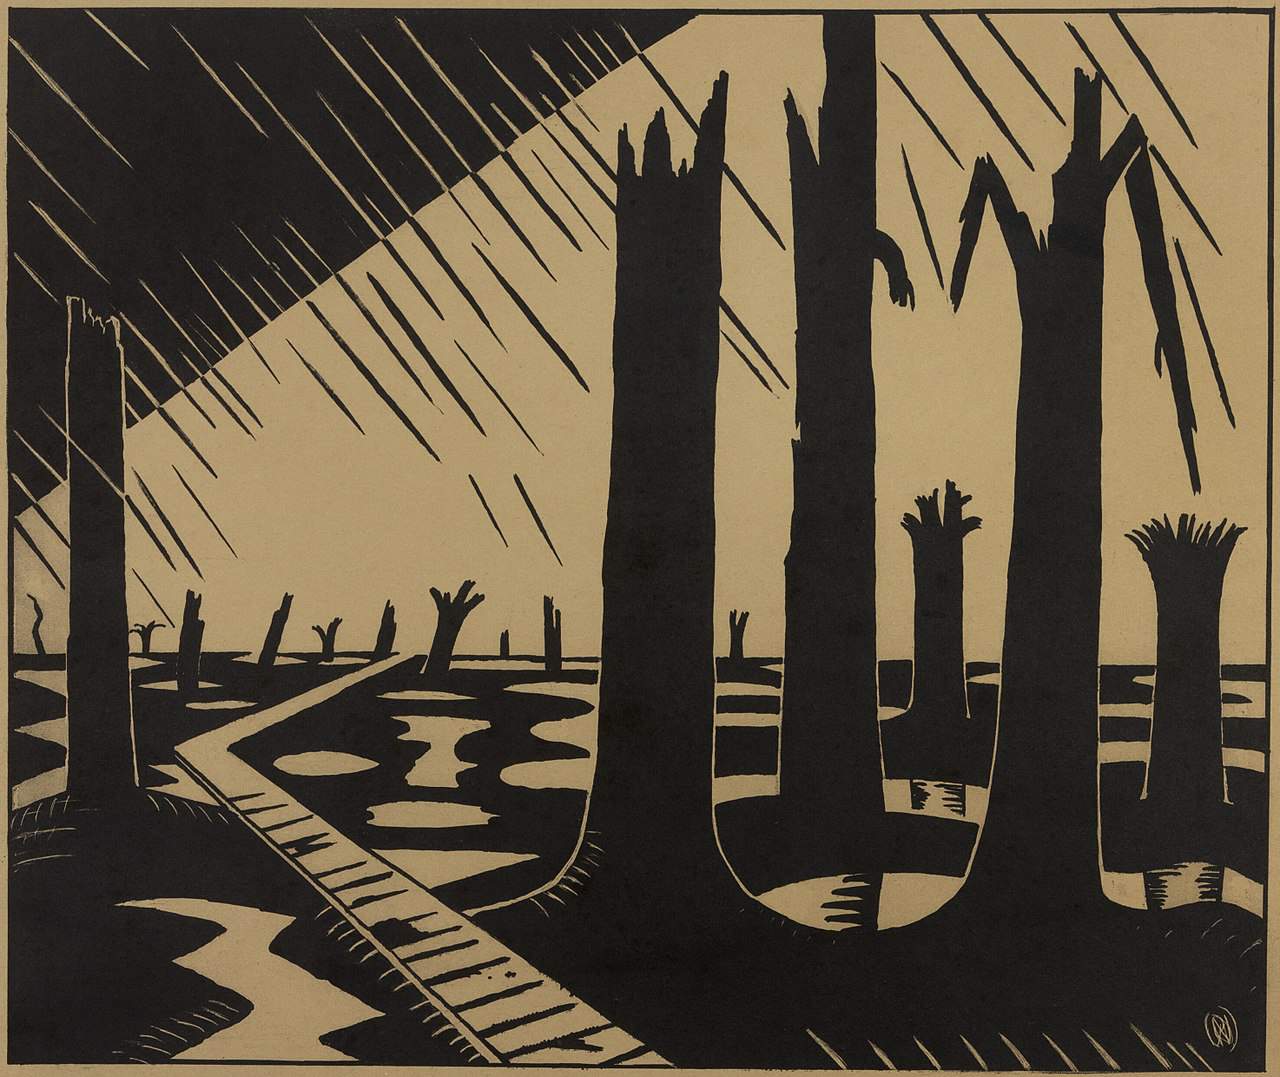 Monochromatic stylized depiction of a shell-pocked landscape and shattered trees